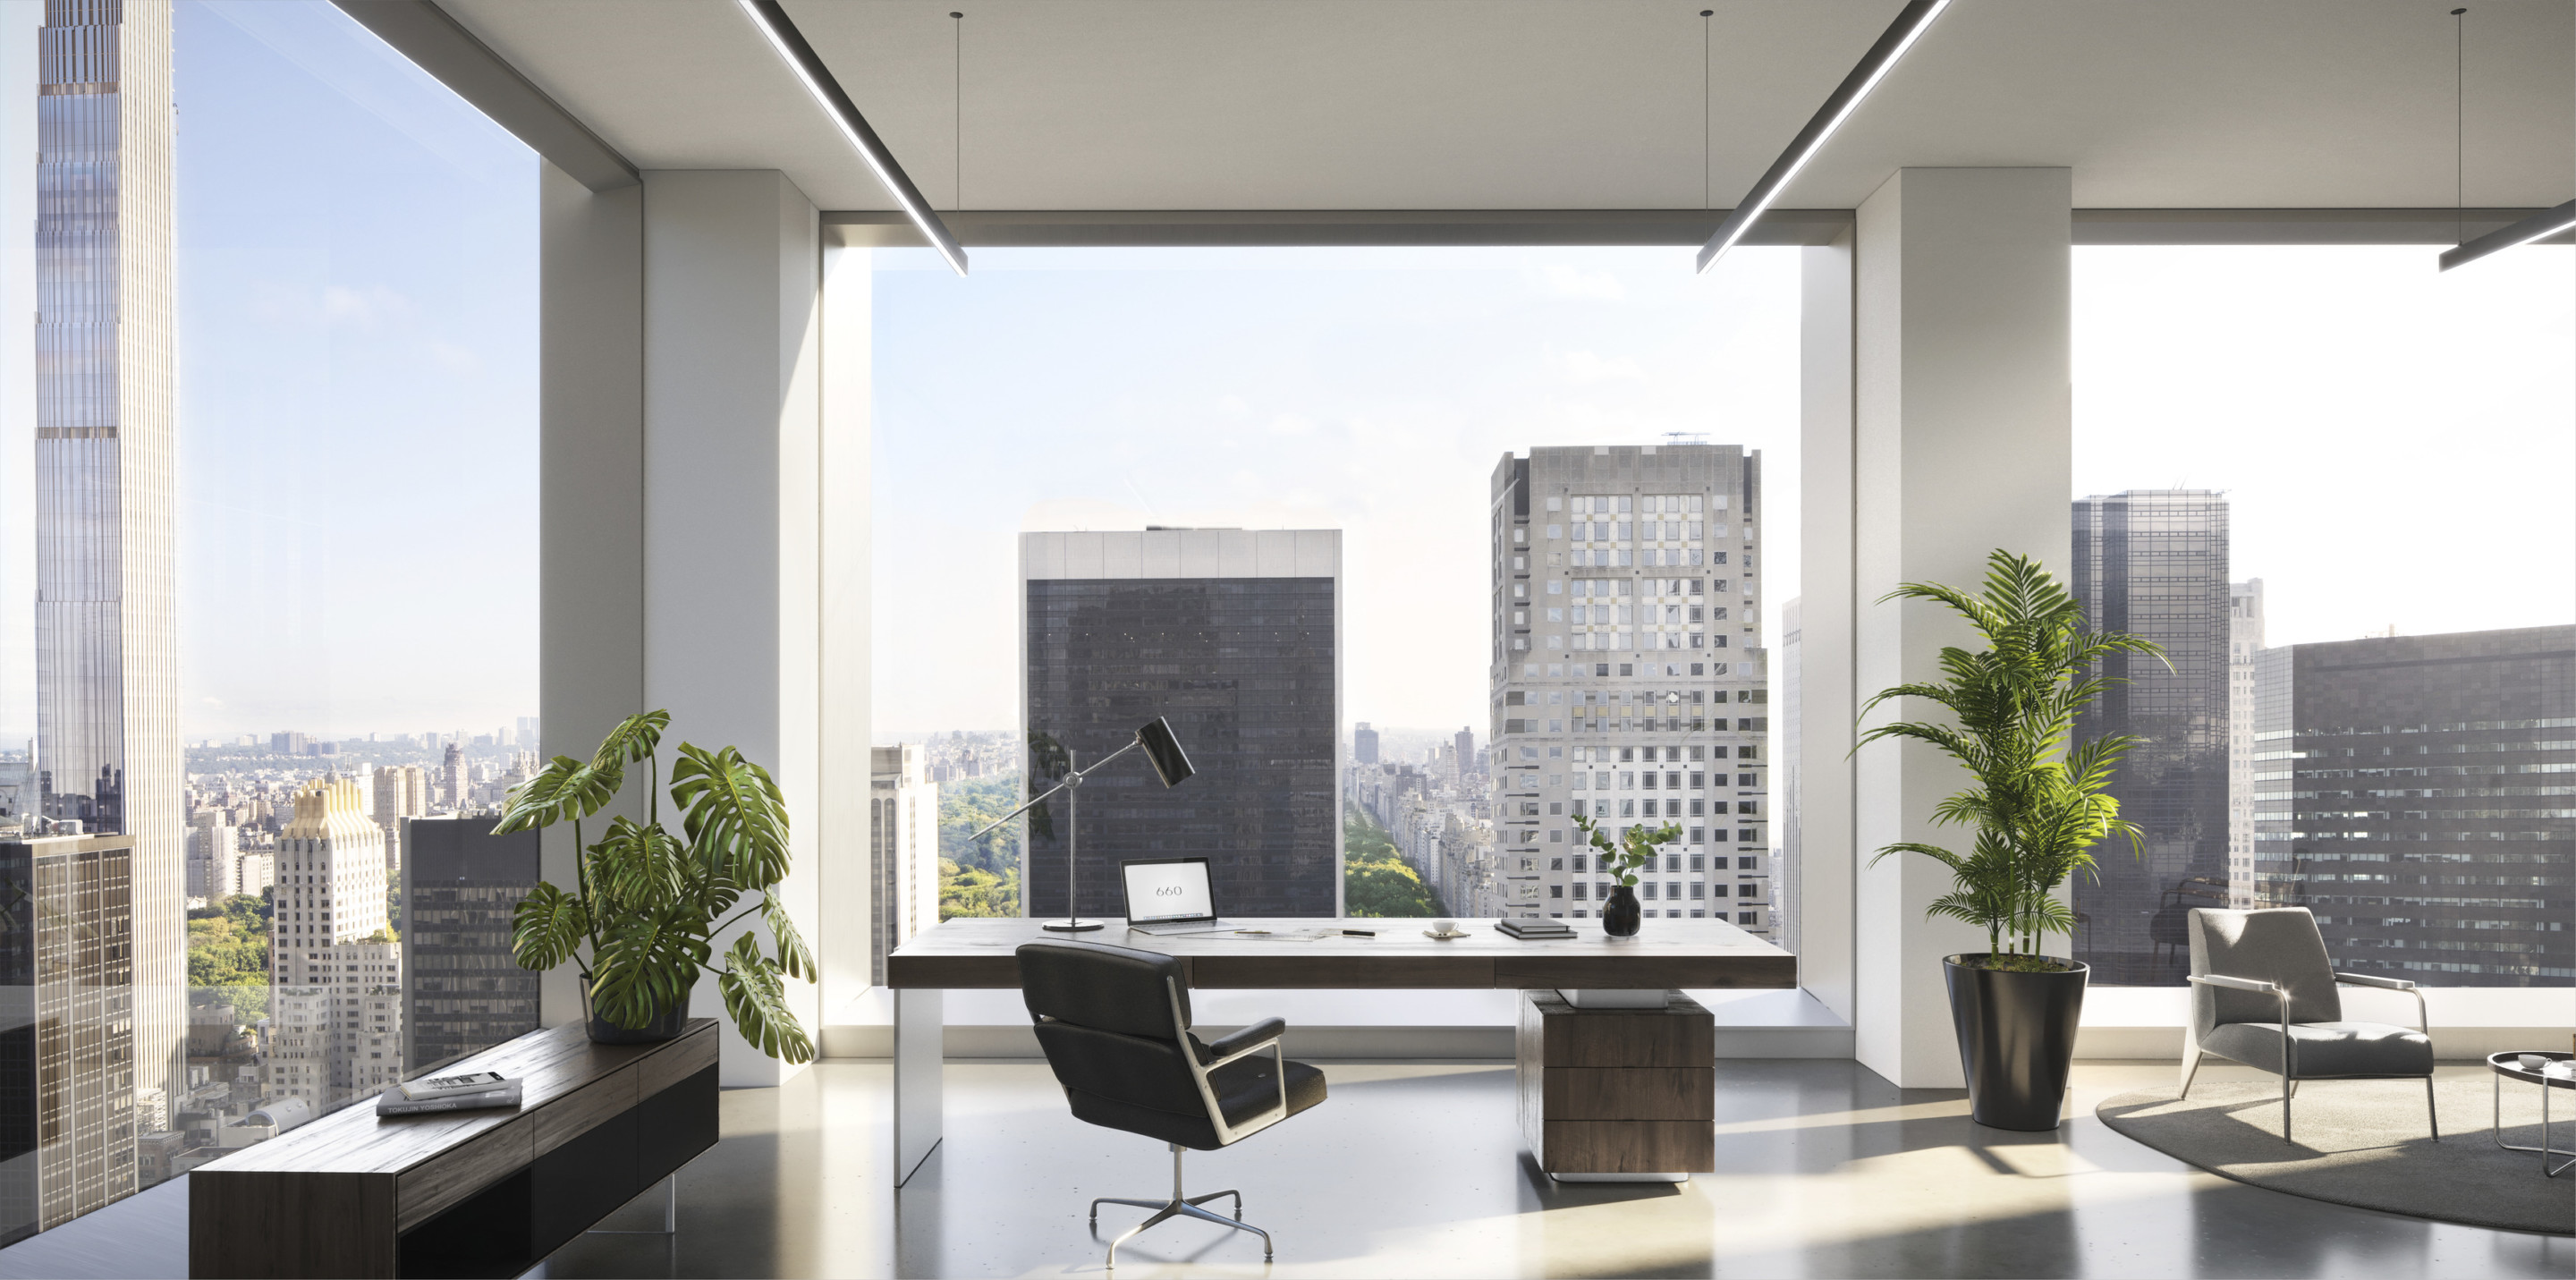 rendering of an office interior with manhattan views